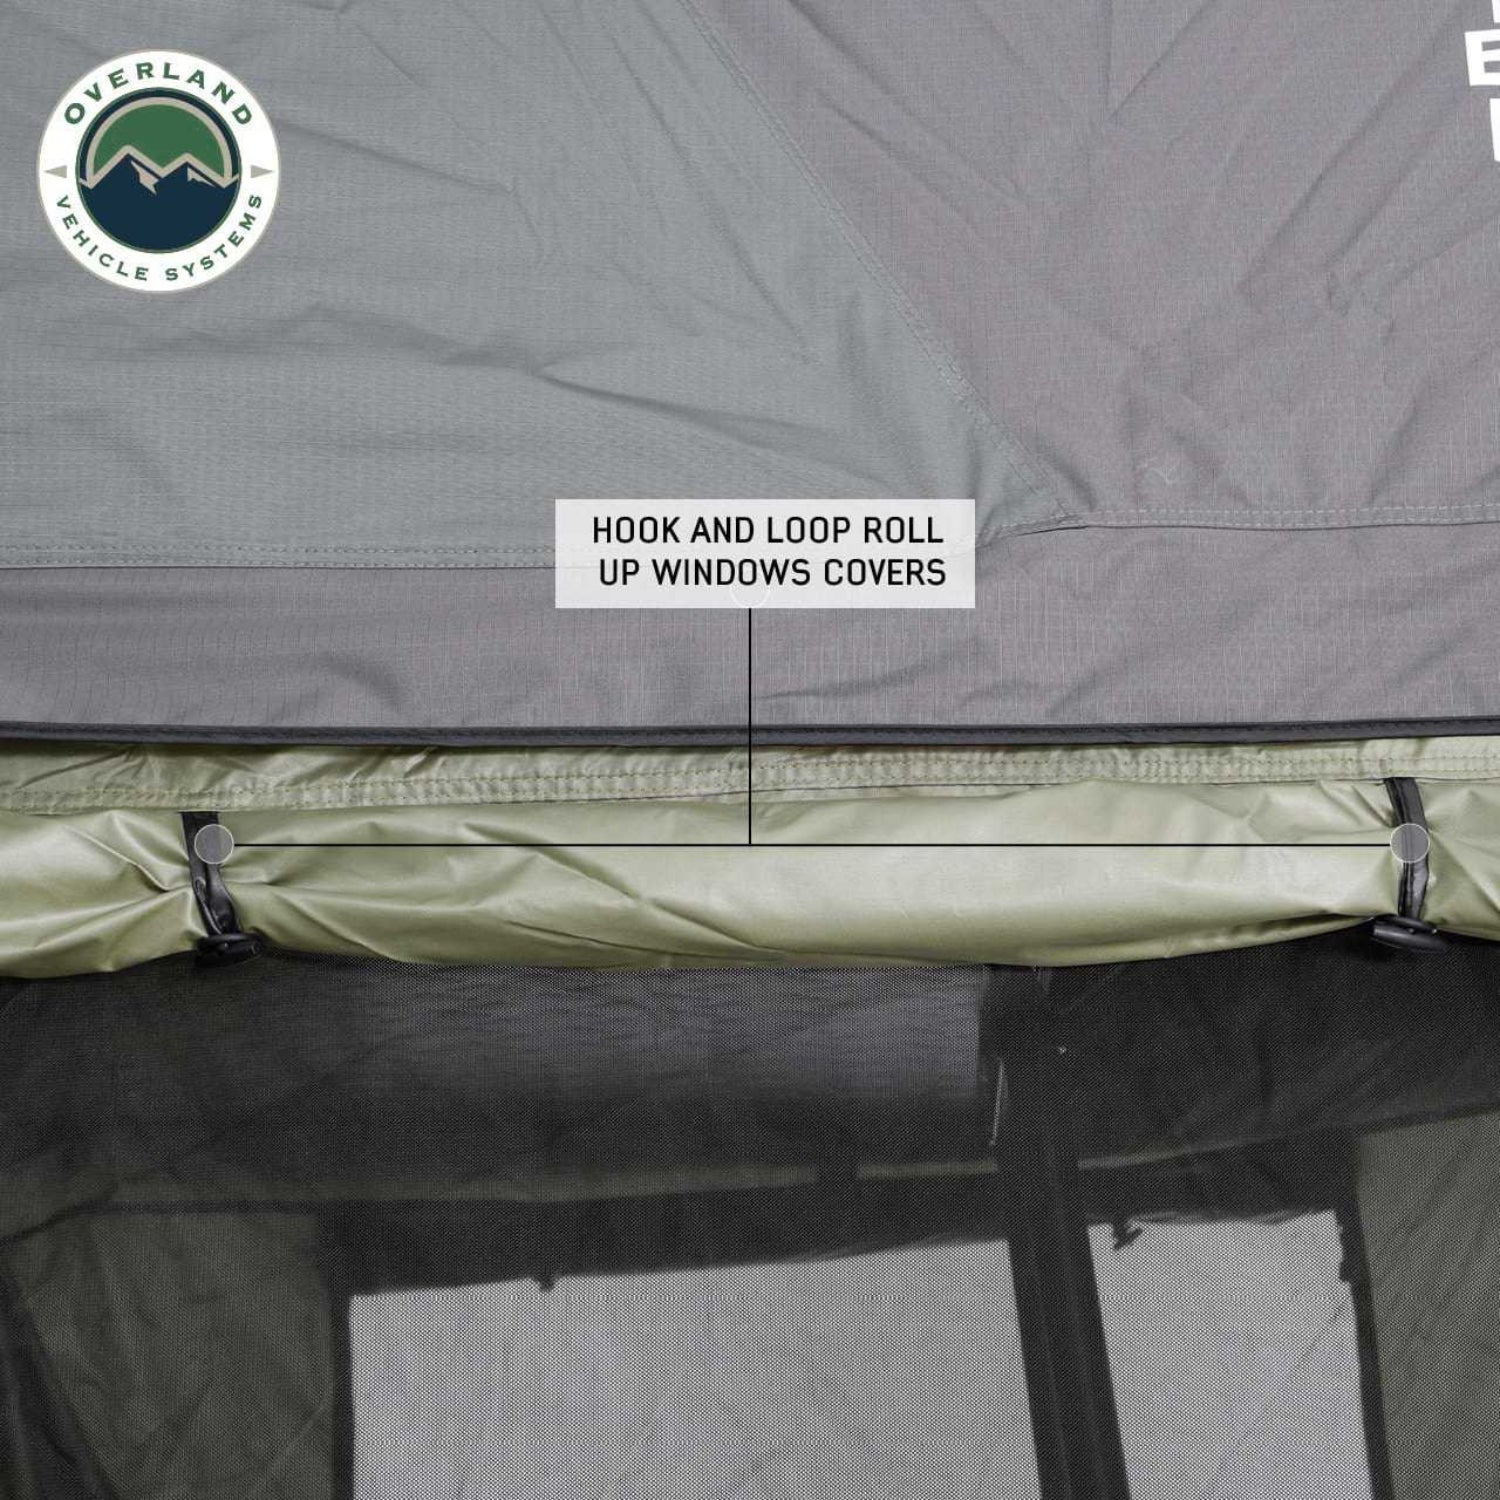 Overland Vehicle Systems Nomadic 4 Roof Top Tent Annex Green Base With Black Floor